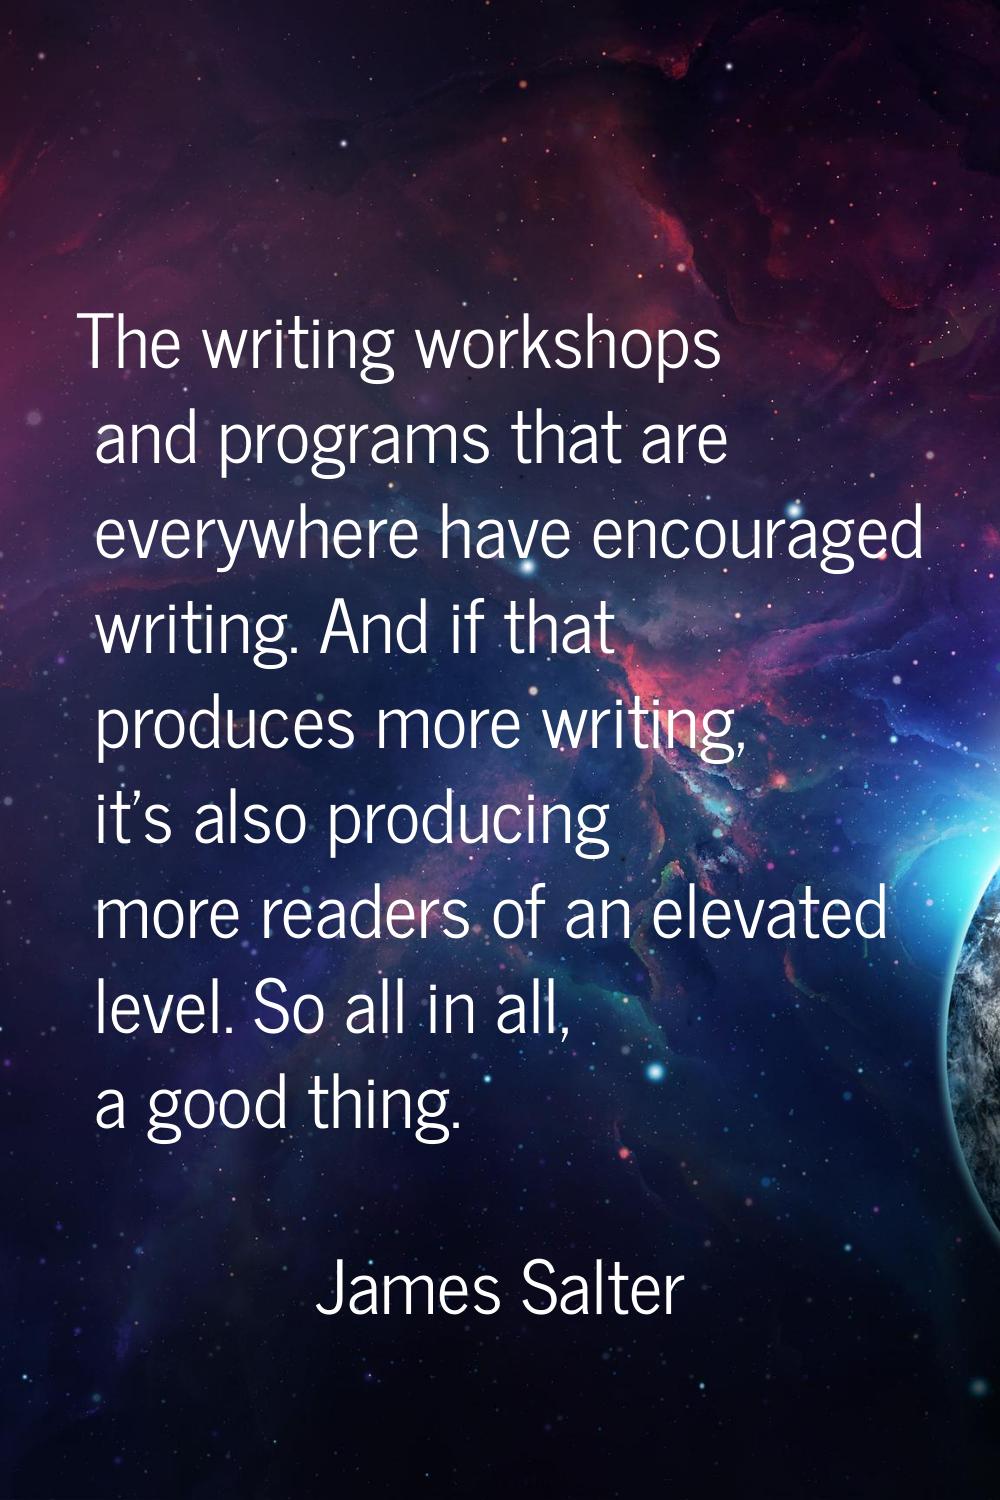 The writing workshops and programs that are everywhere have encouraged writing. And if that produce